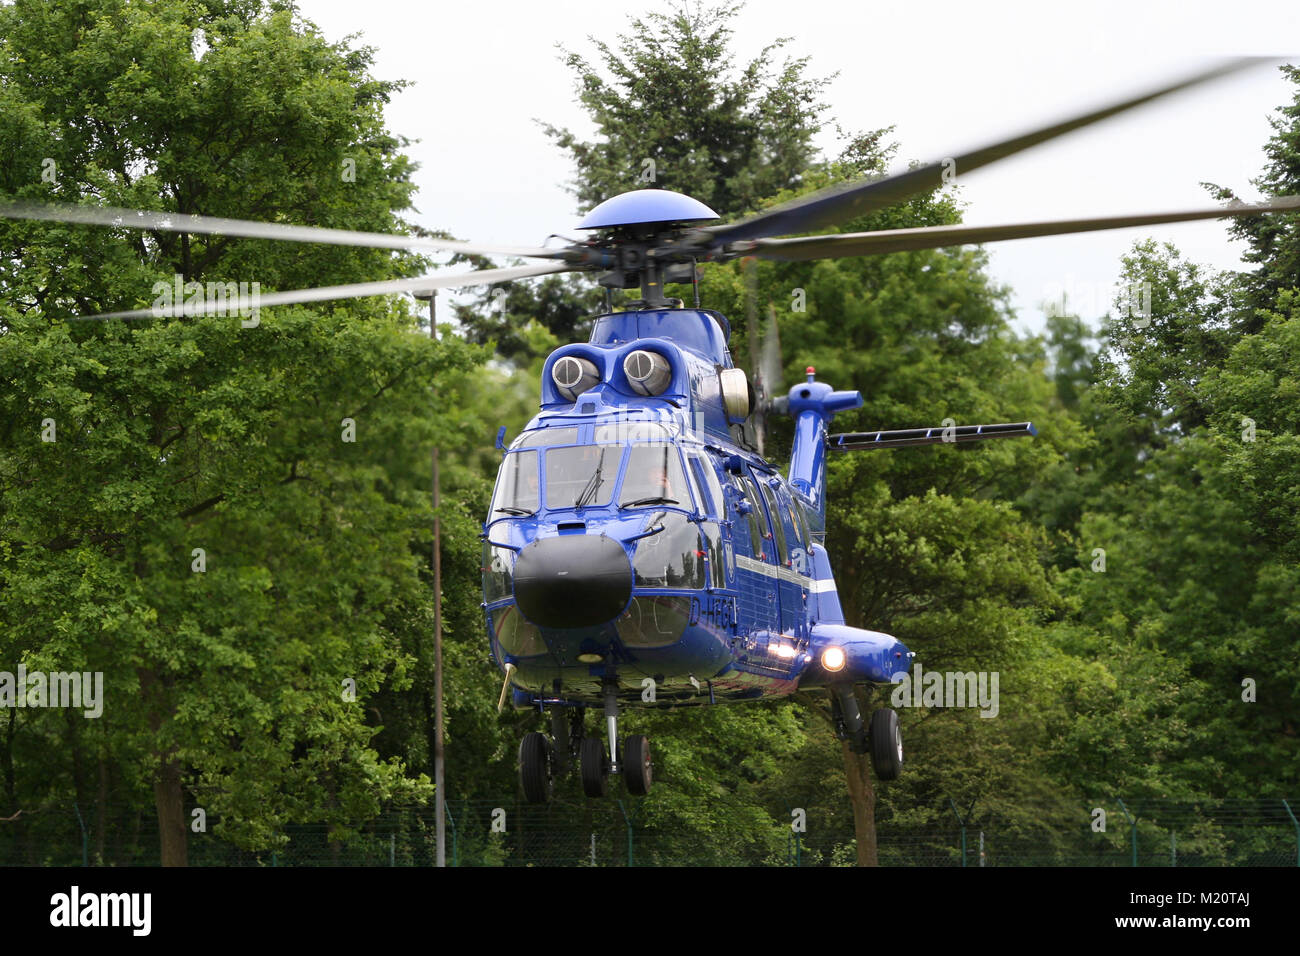 BONN, GERMANY - MAY 22, 2010: German Border patrol Eurocopter AS-332L1 Super Puma helicopter taking off during the Bundesgrenzschutz open house at Bon Stock Photo